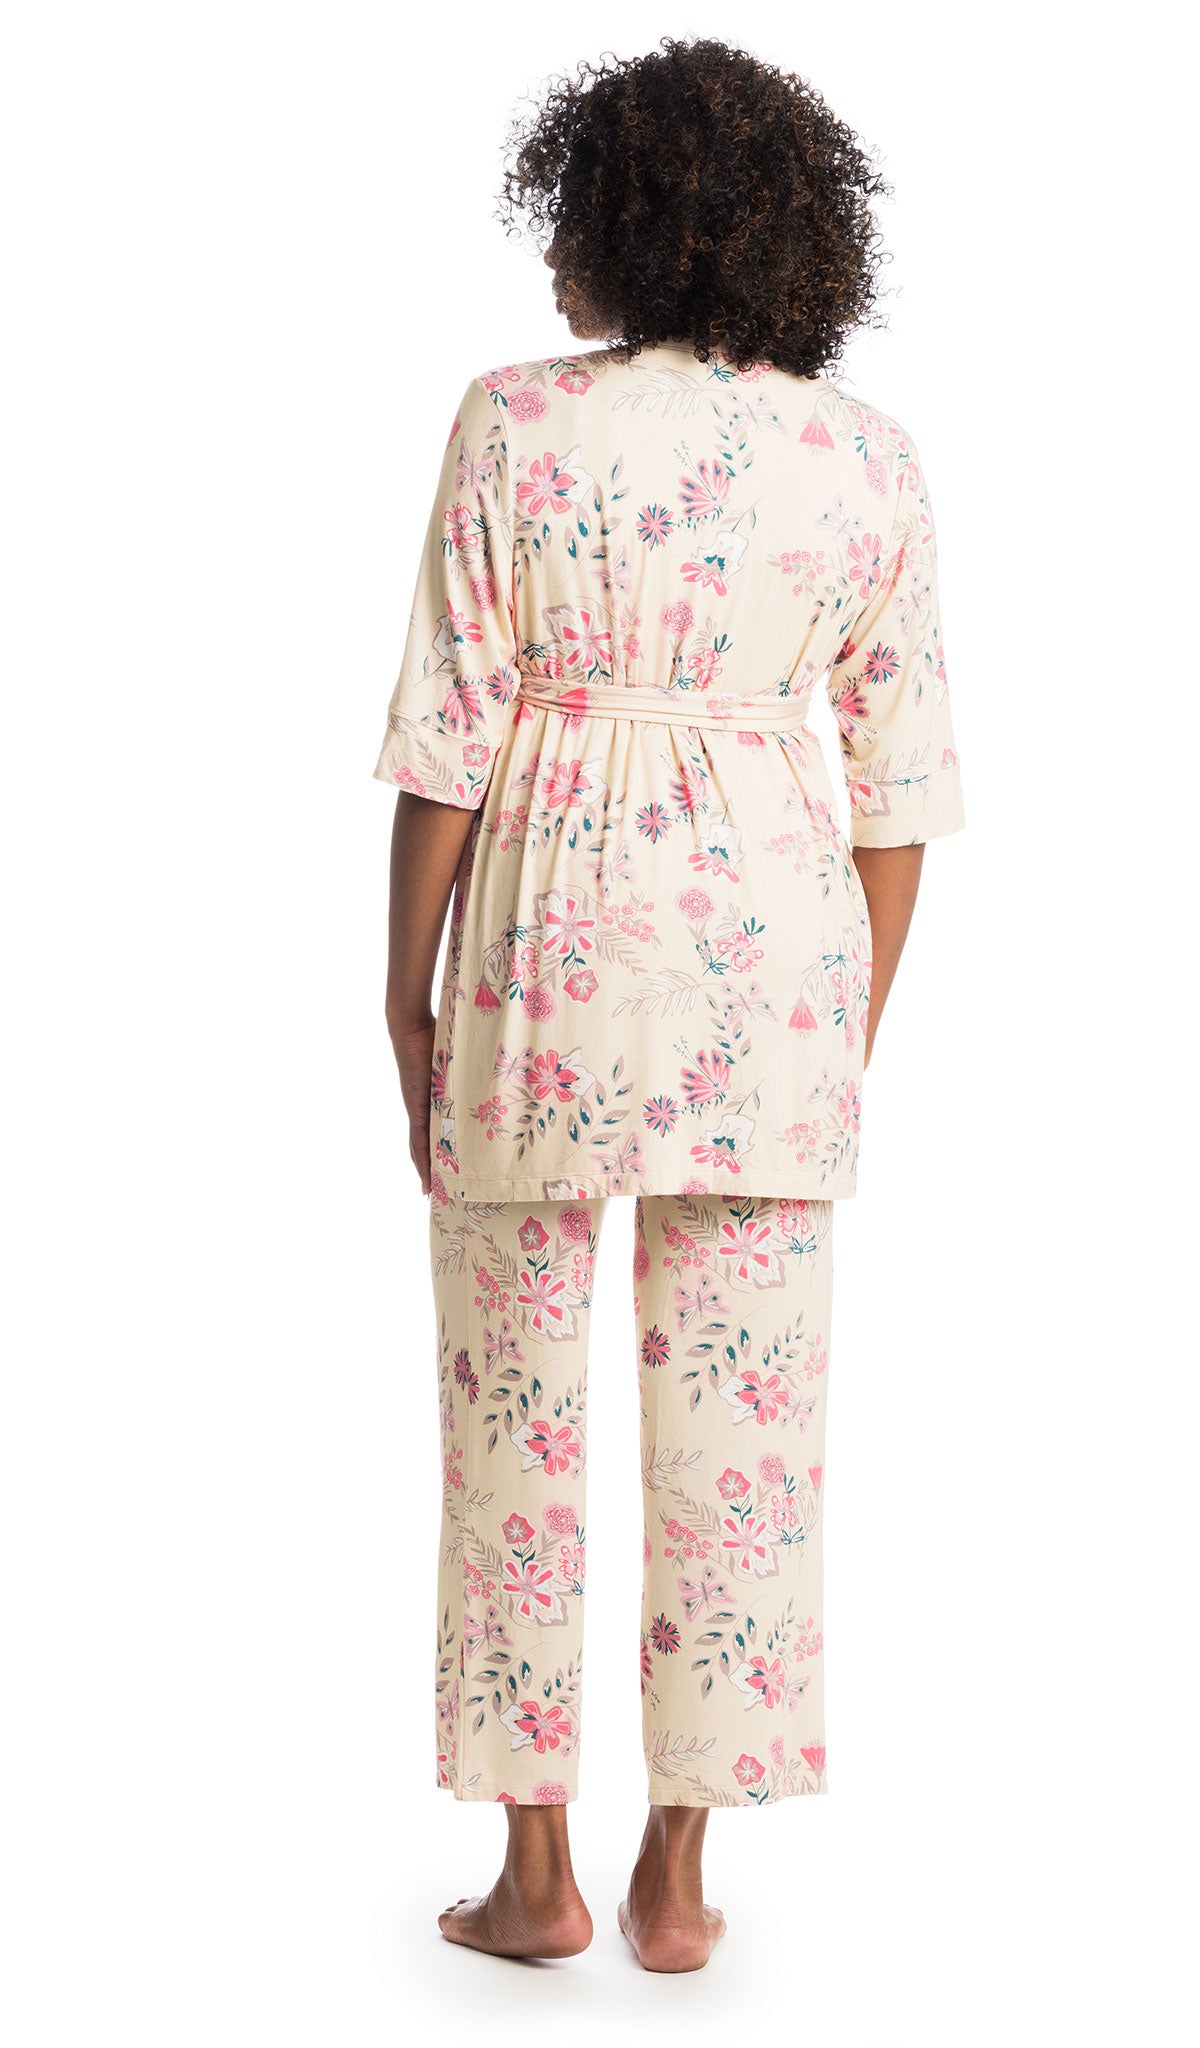 Wild Flower Analise 5-Piece Set, back shot of woman wearing robe and pant.